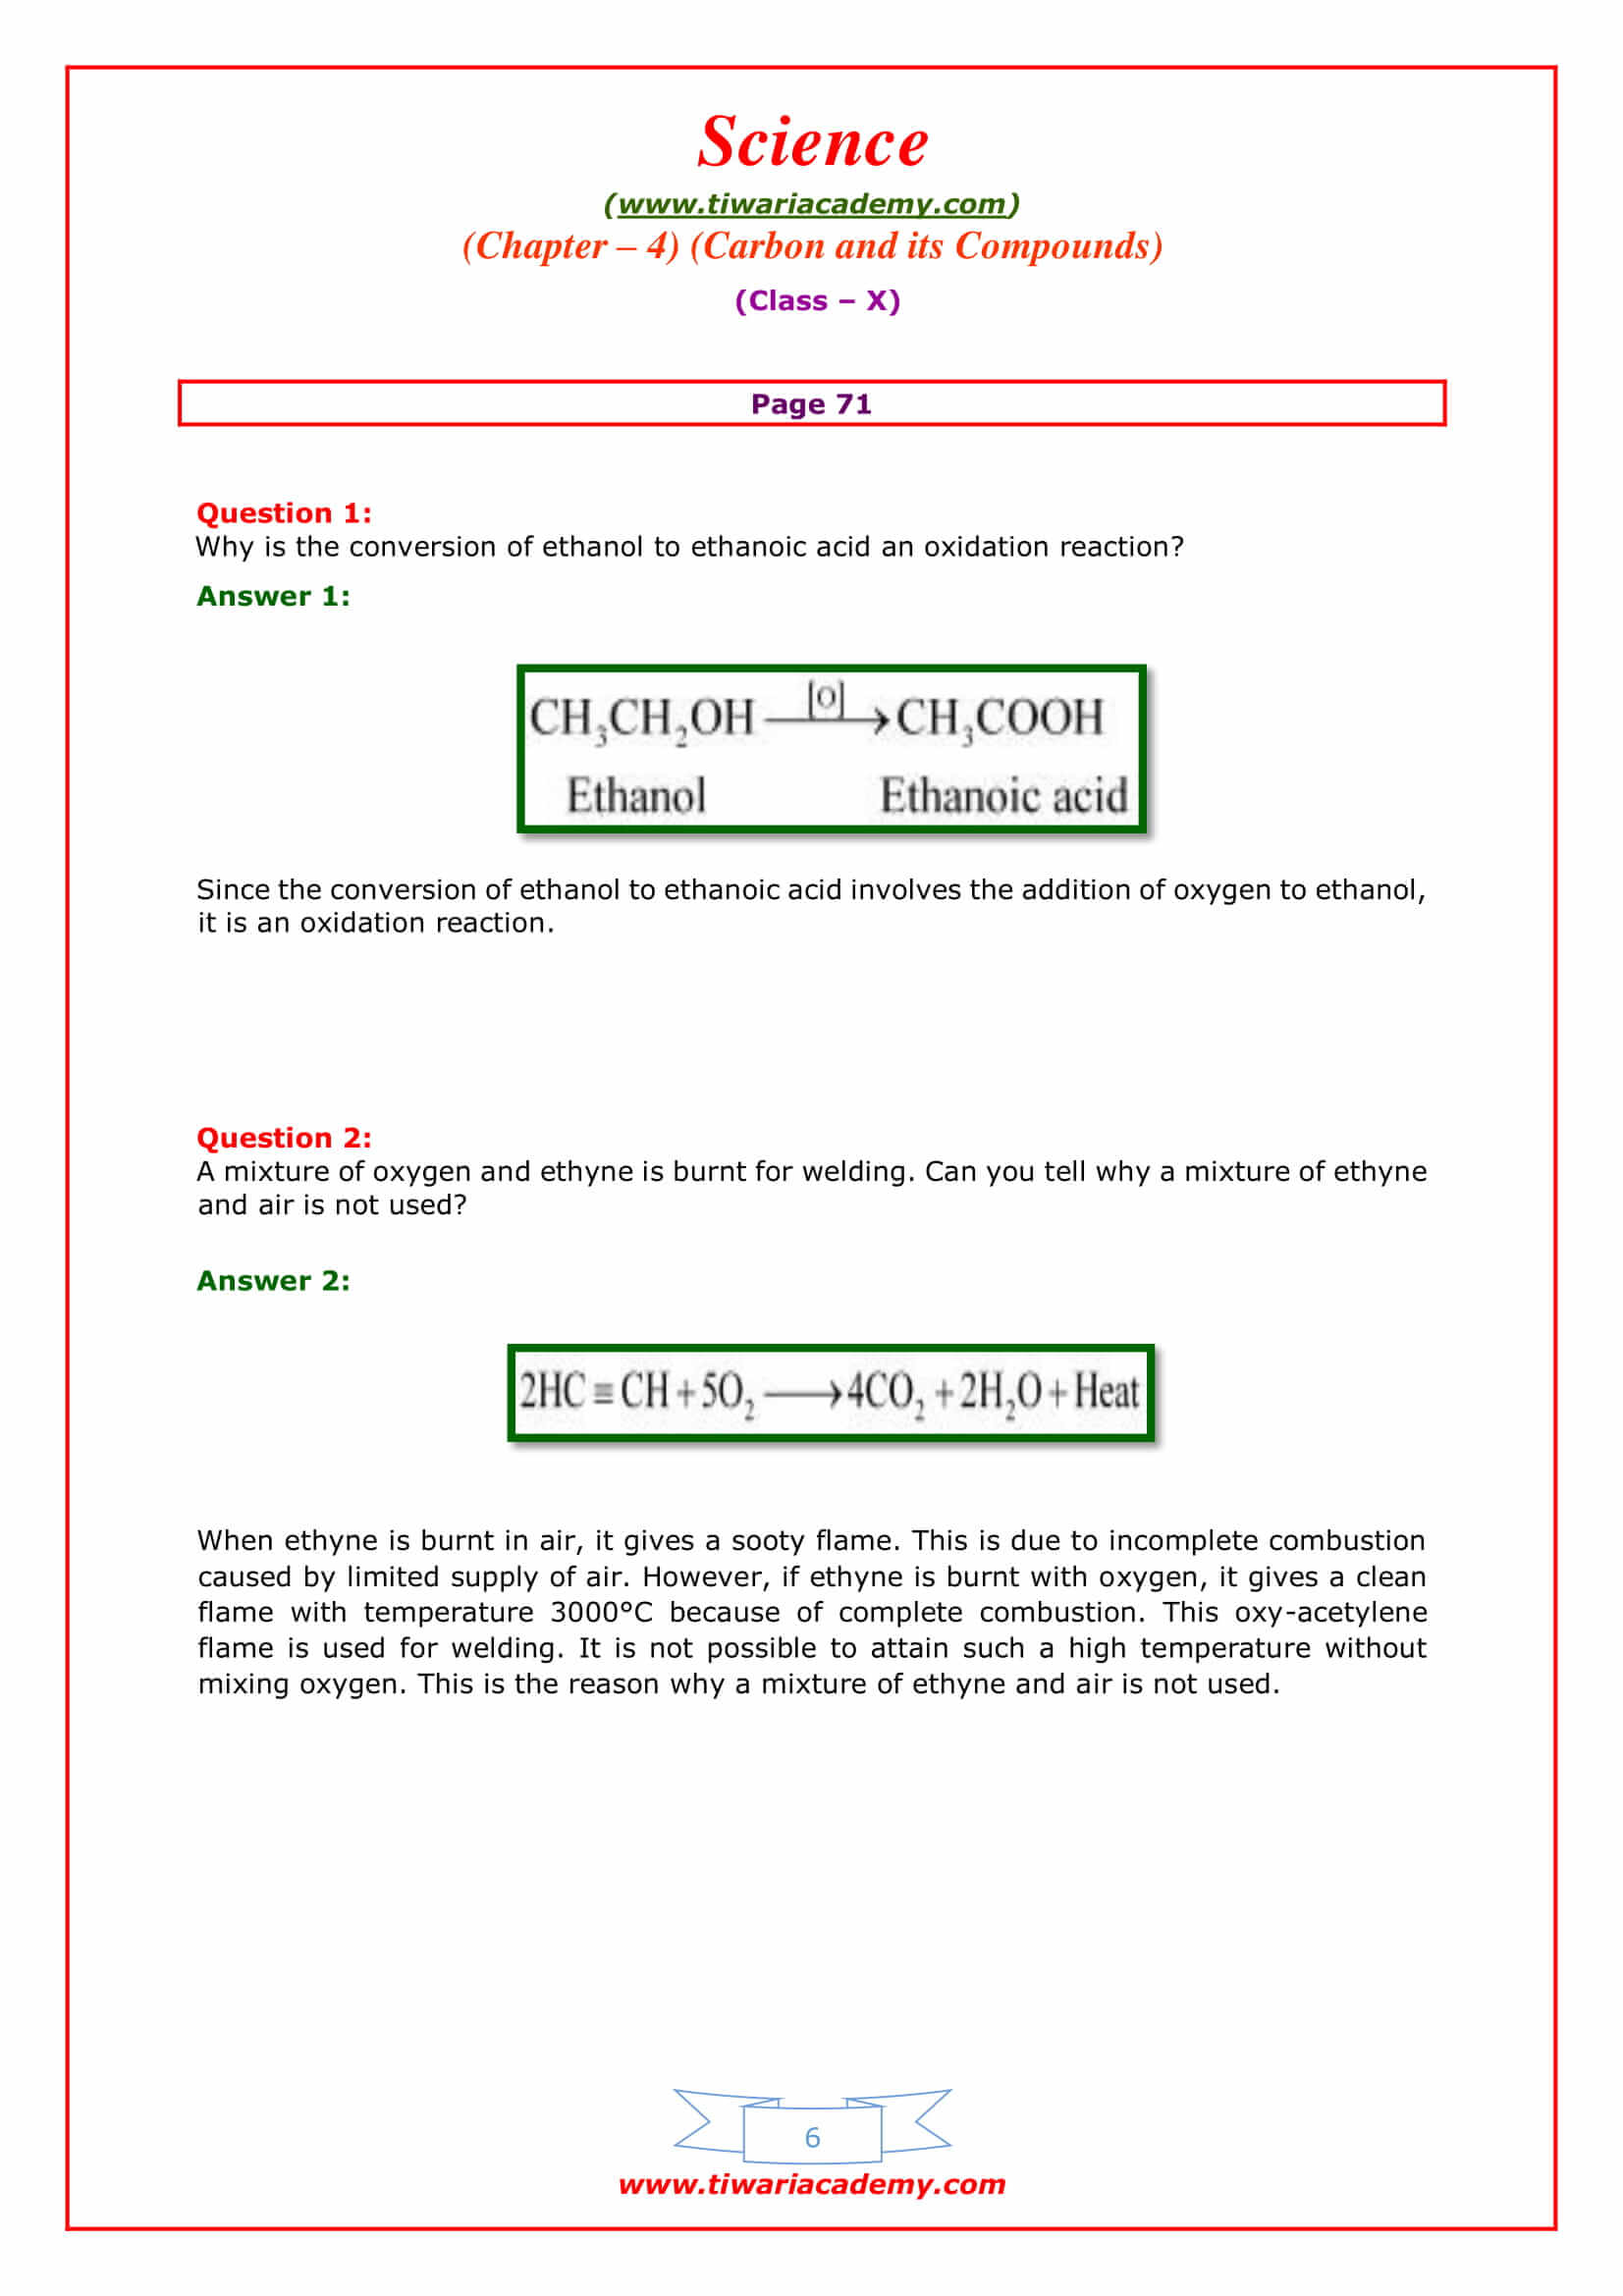 Class 10 Science Chapter 4 page 71 answers